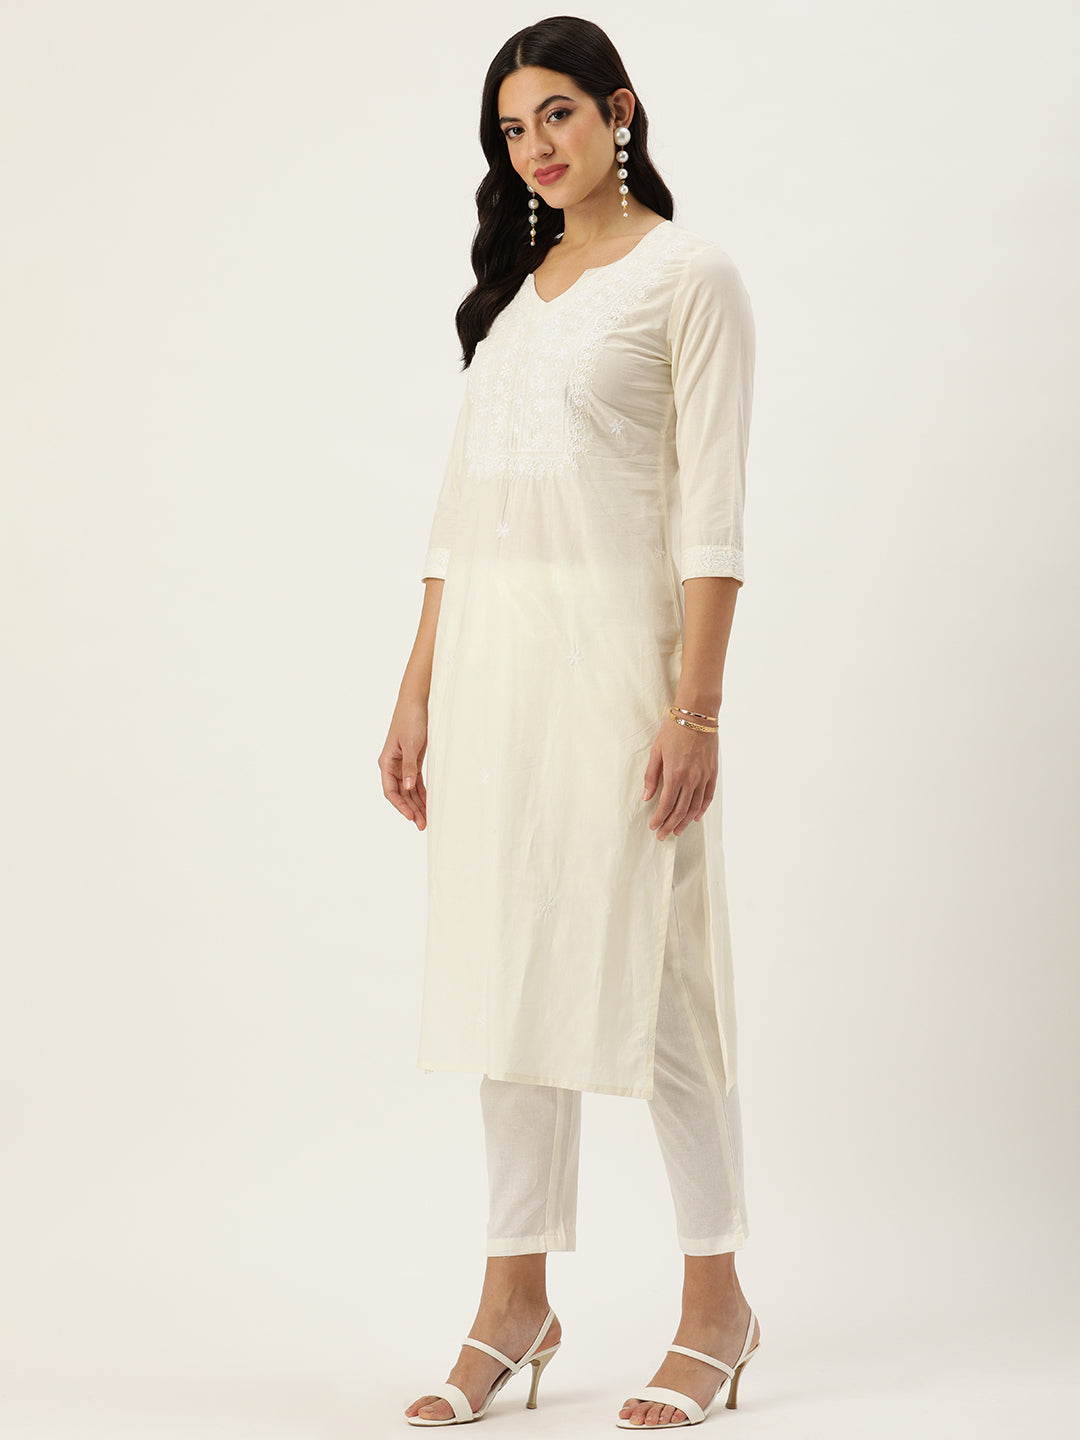 Ivory Floral Embroidered Thread Work Kurta with a pocket 